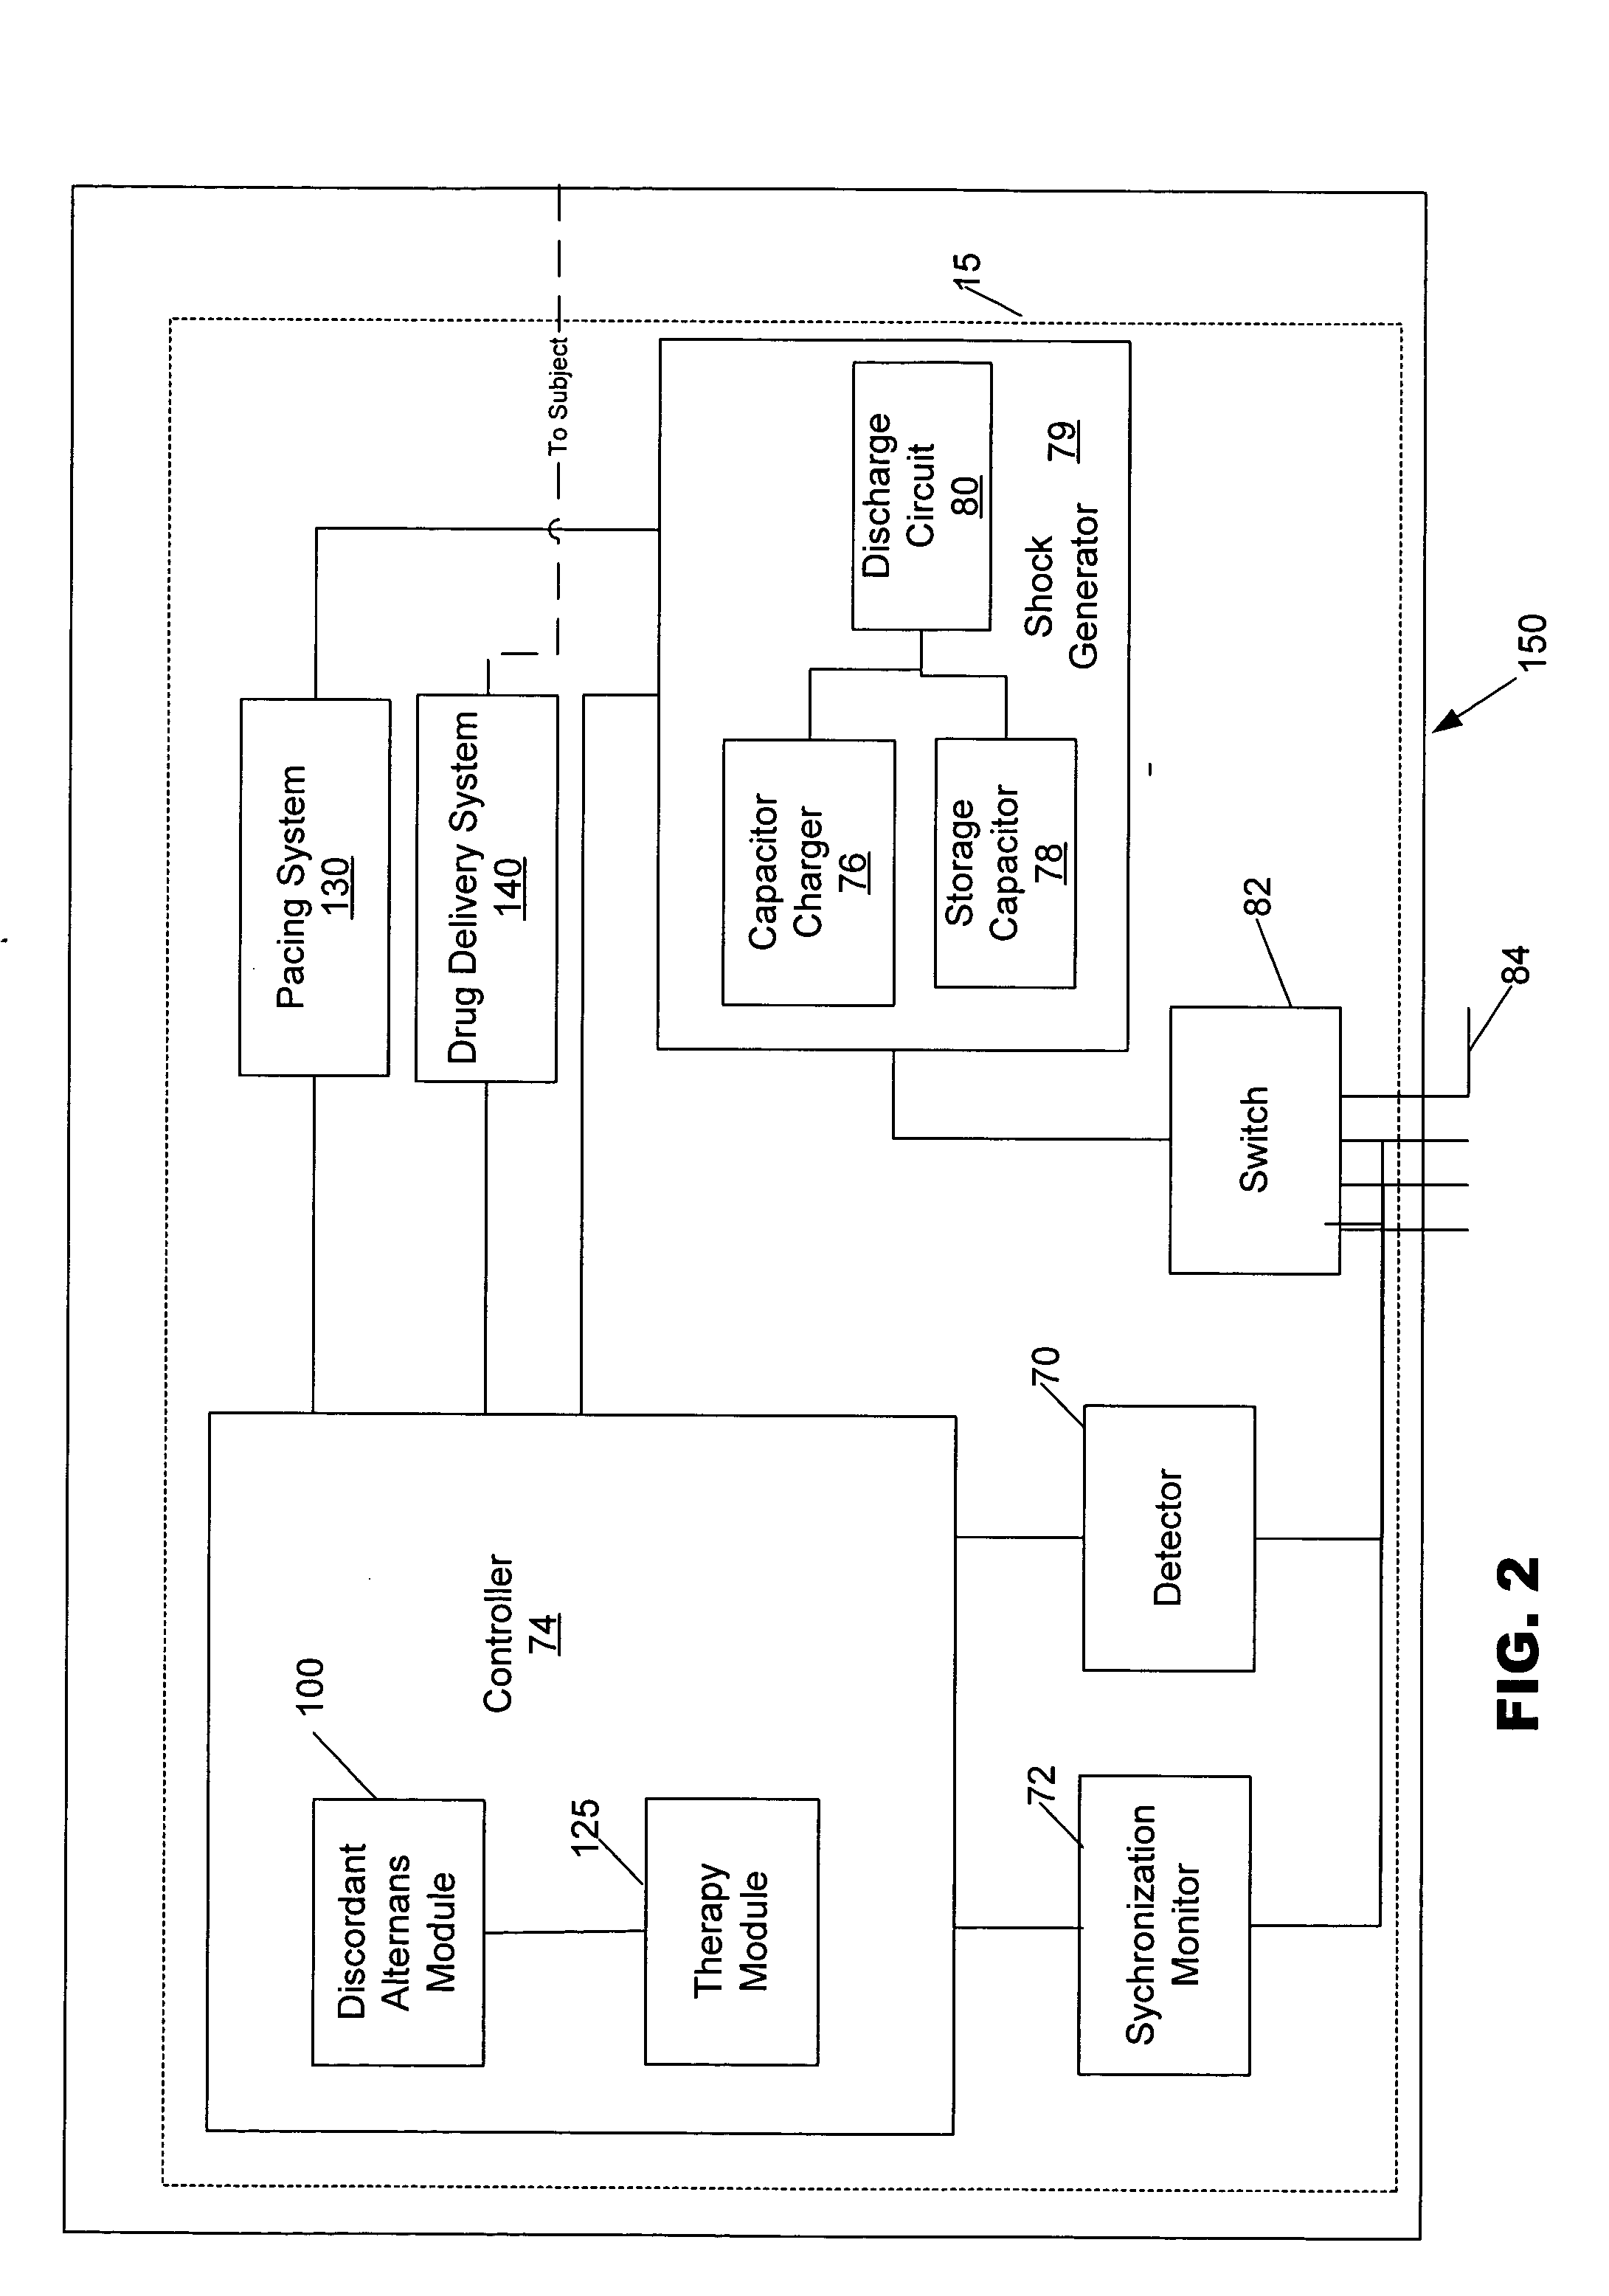 Methods, systems and computer program products for selectively initiating interventional therapy to reduce the risk of arrhythmia